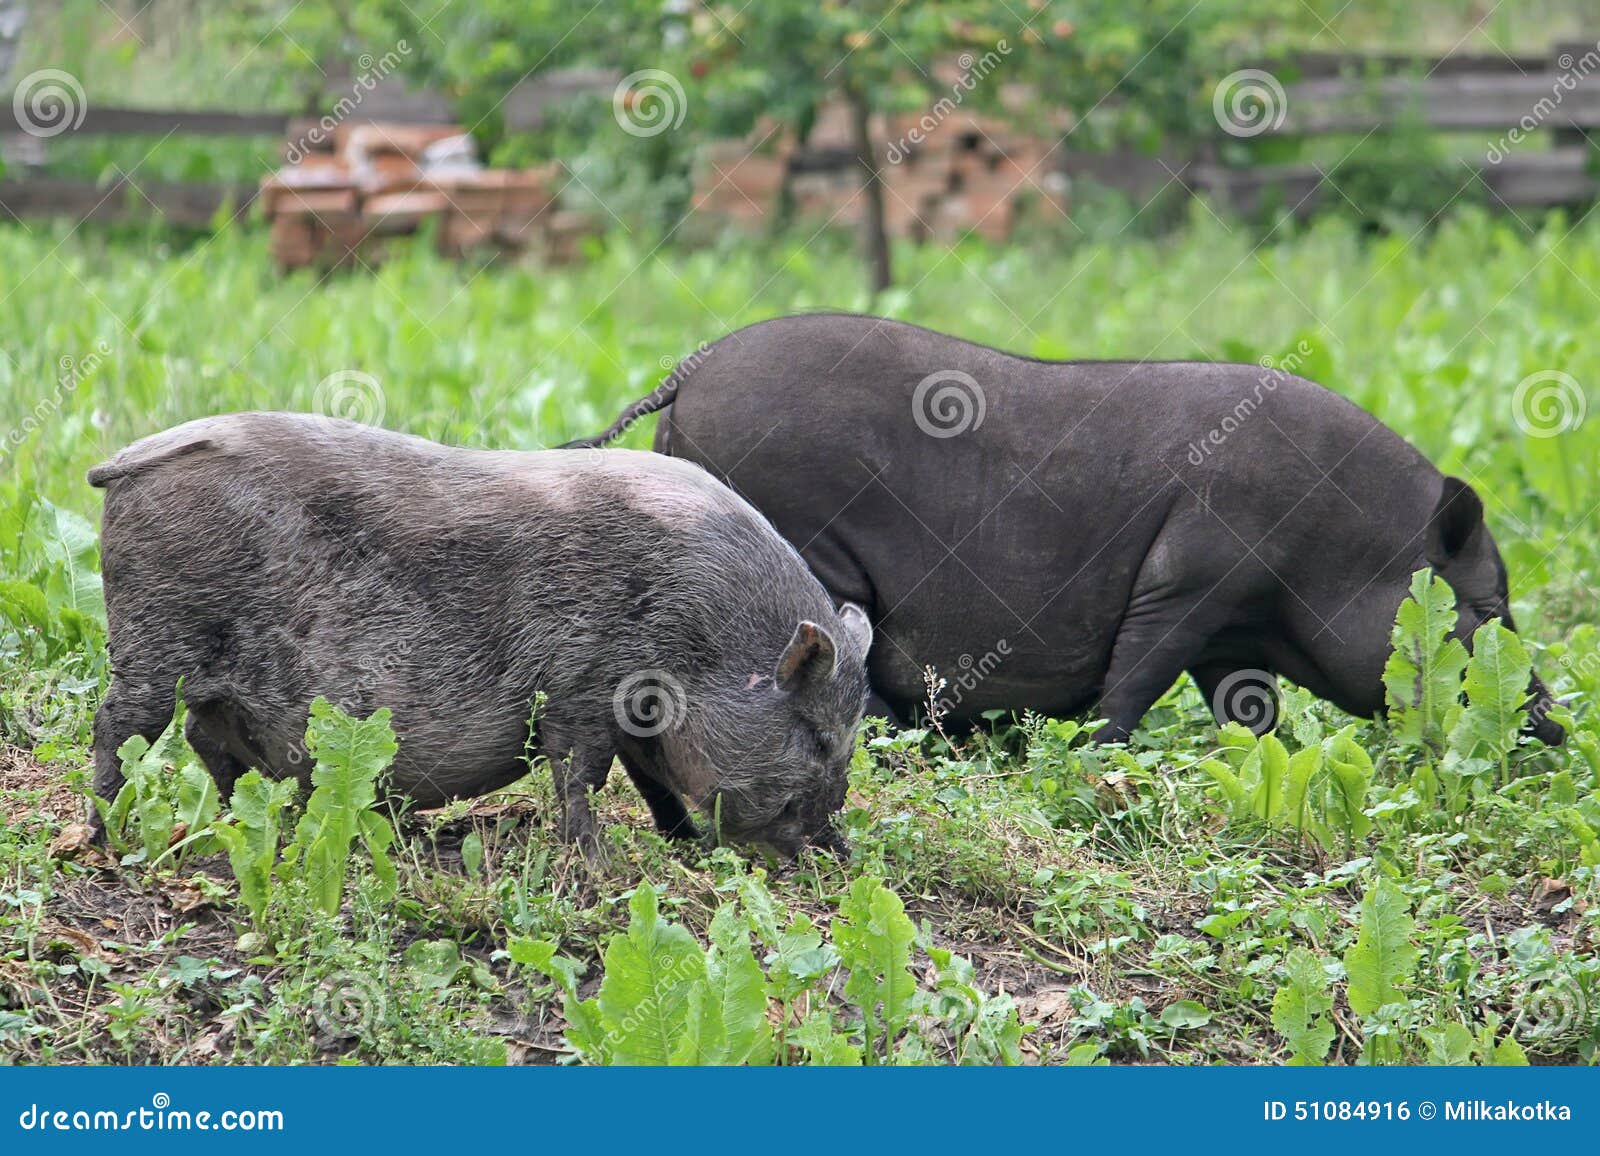 two pot-bellied pigs herbivores grazing in the meadow